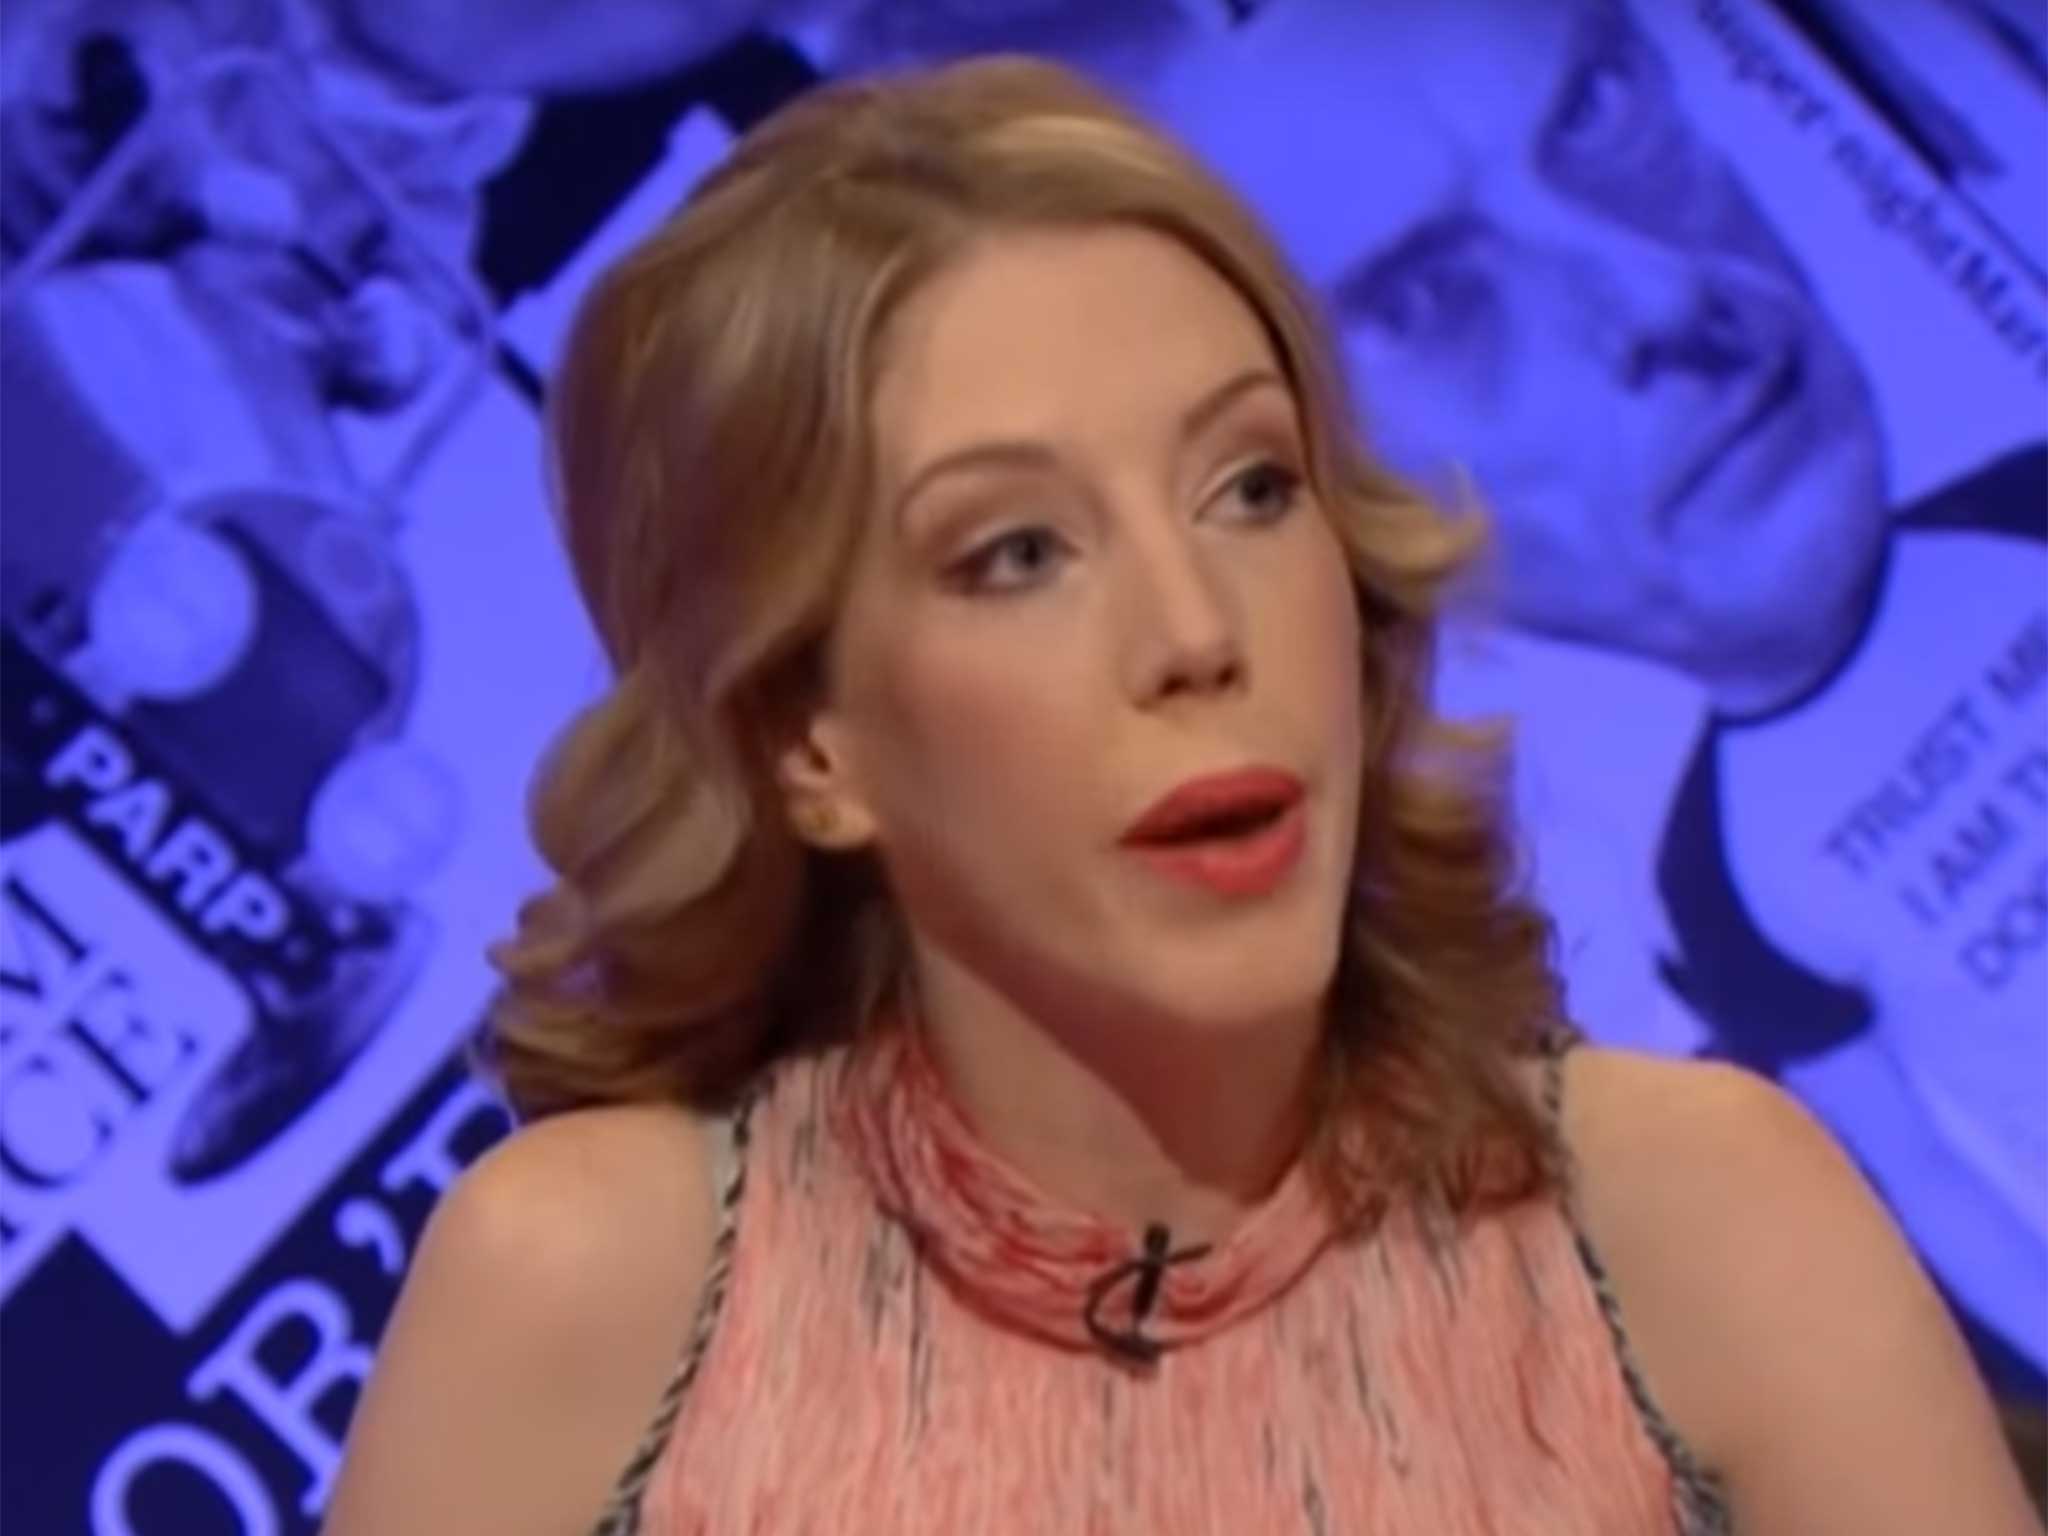 Katherine Ryan has been a frequent guest on Have I Got News for You